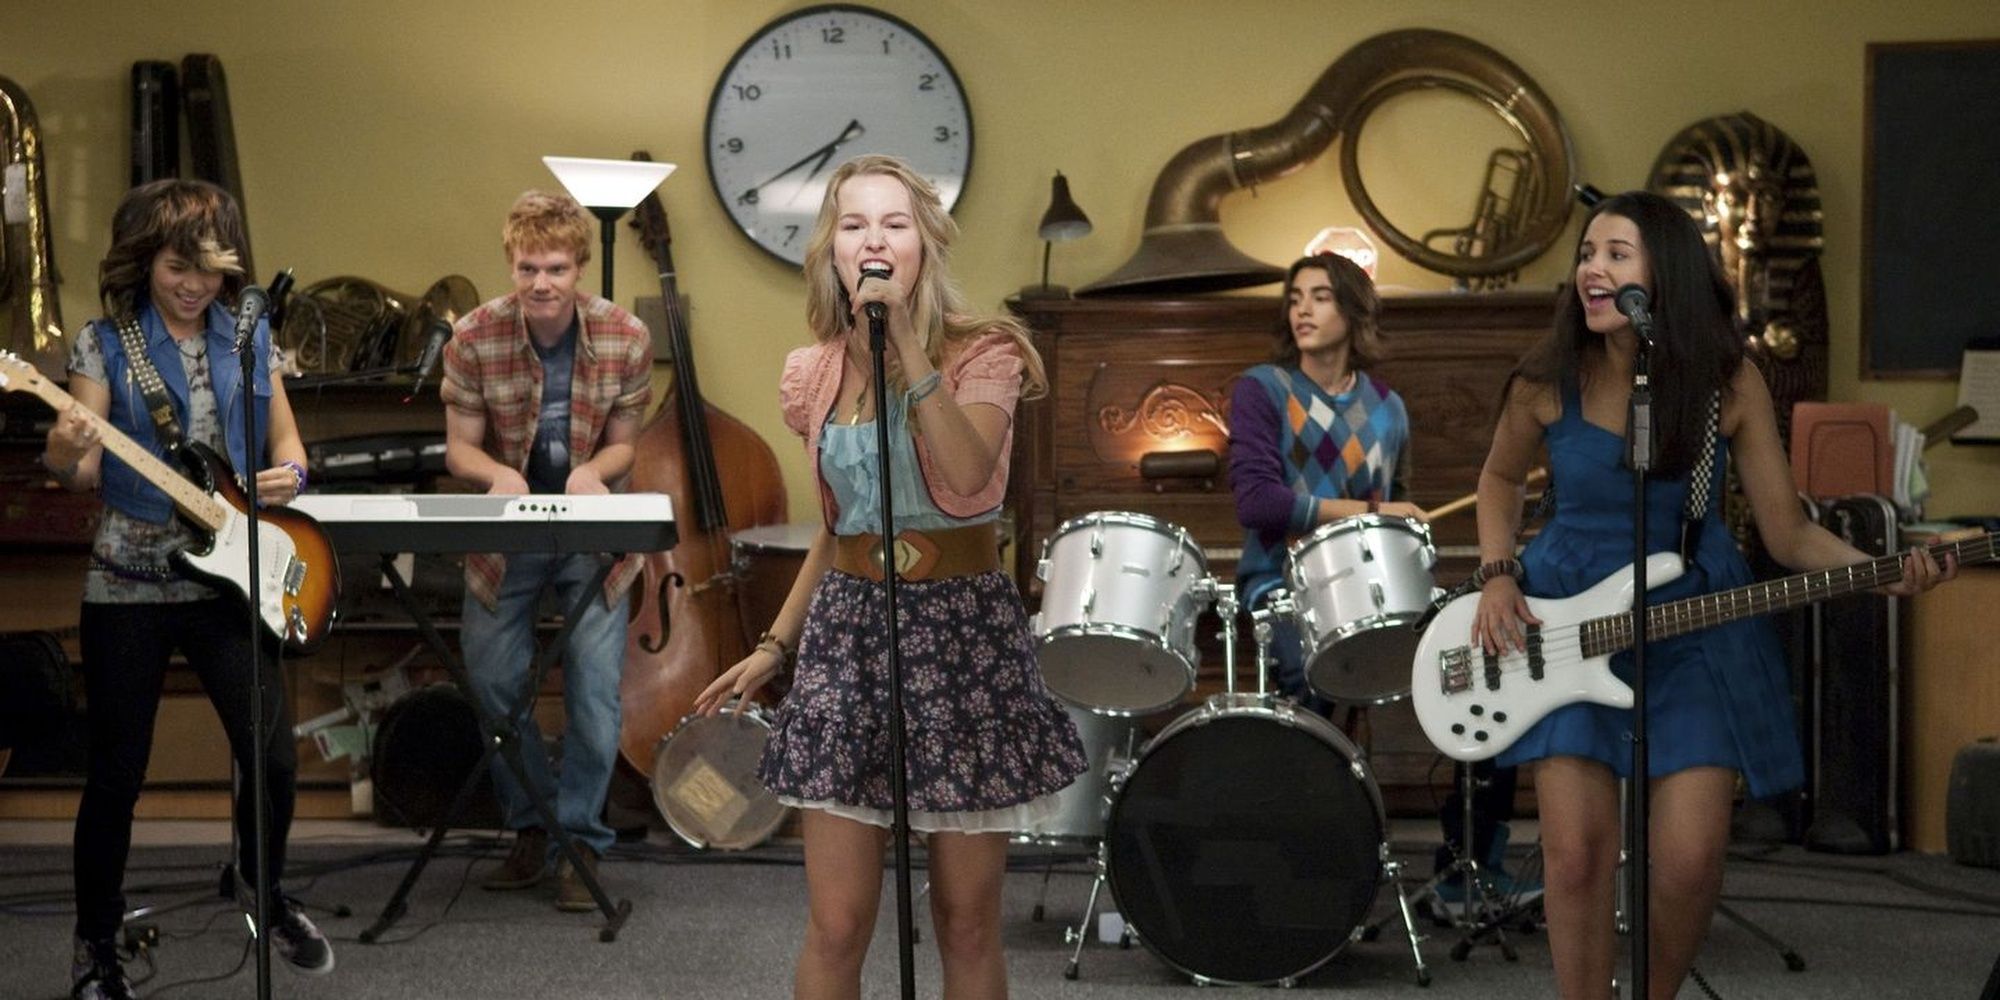 The Lemonade Mouth crew jamming out